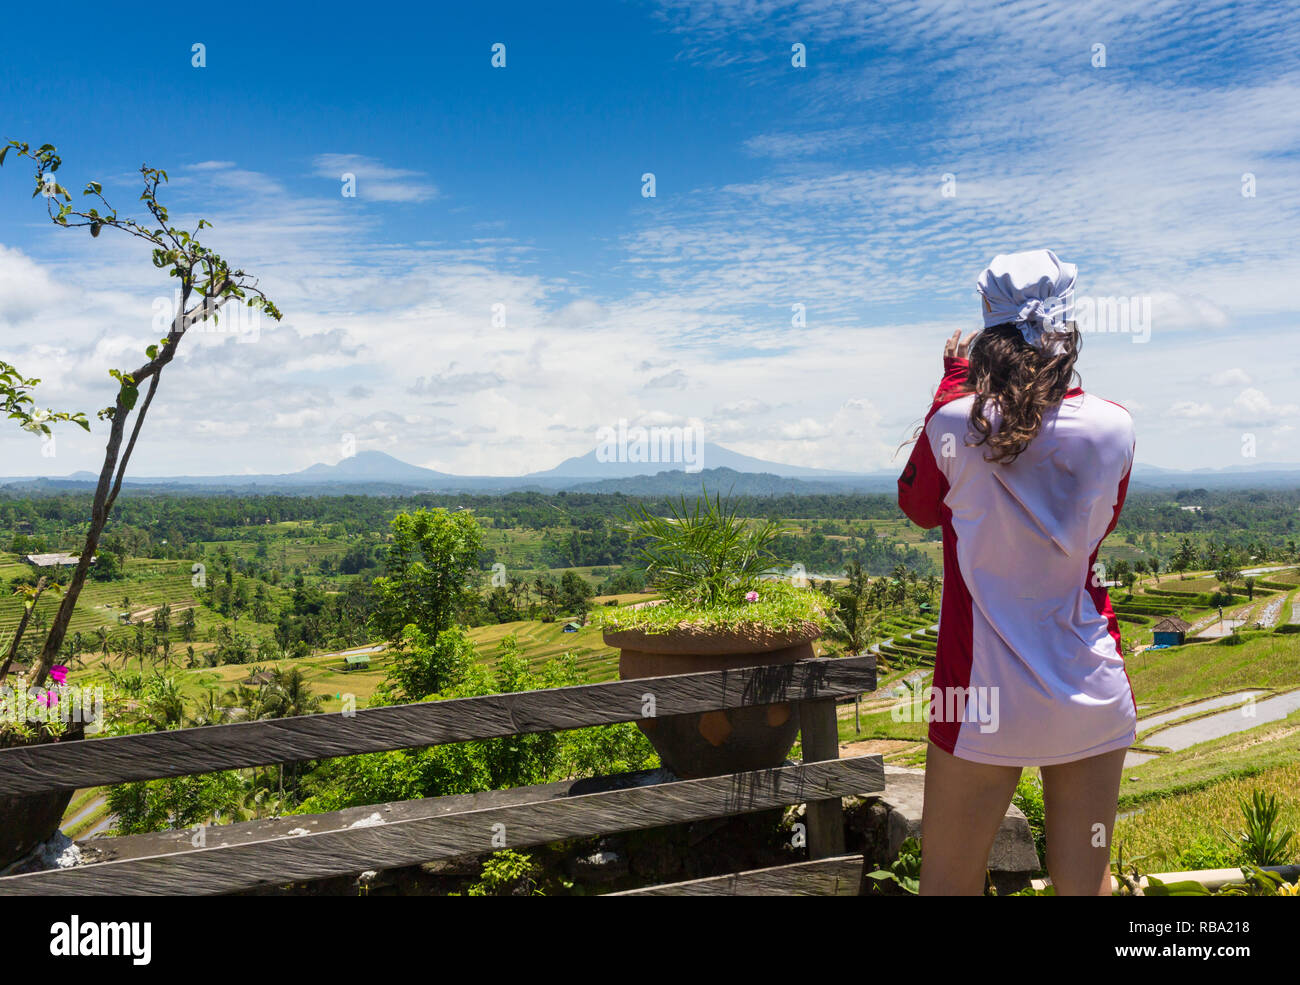 Family vacation lifestyle. Young woman stand on edge of overhanging bridge on high cliff. Happy girl looking at stunning tropical jungle view. Tukad Melangit is popular travel destination in Bali. Stock Photo